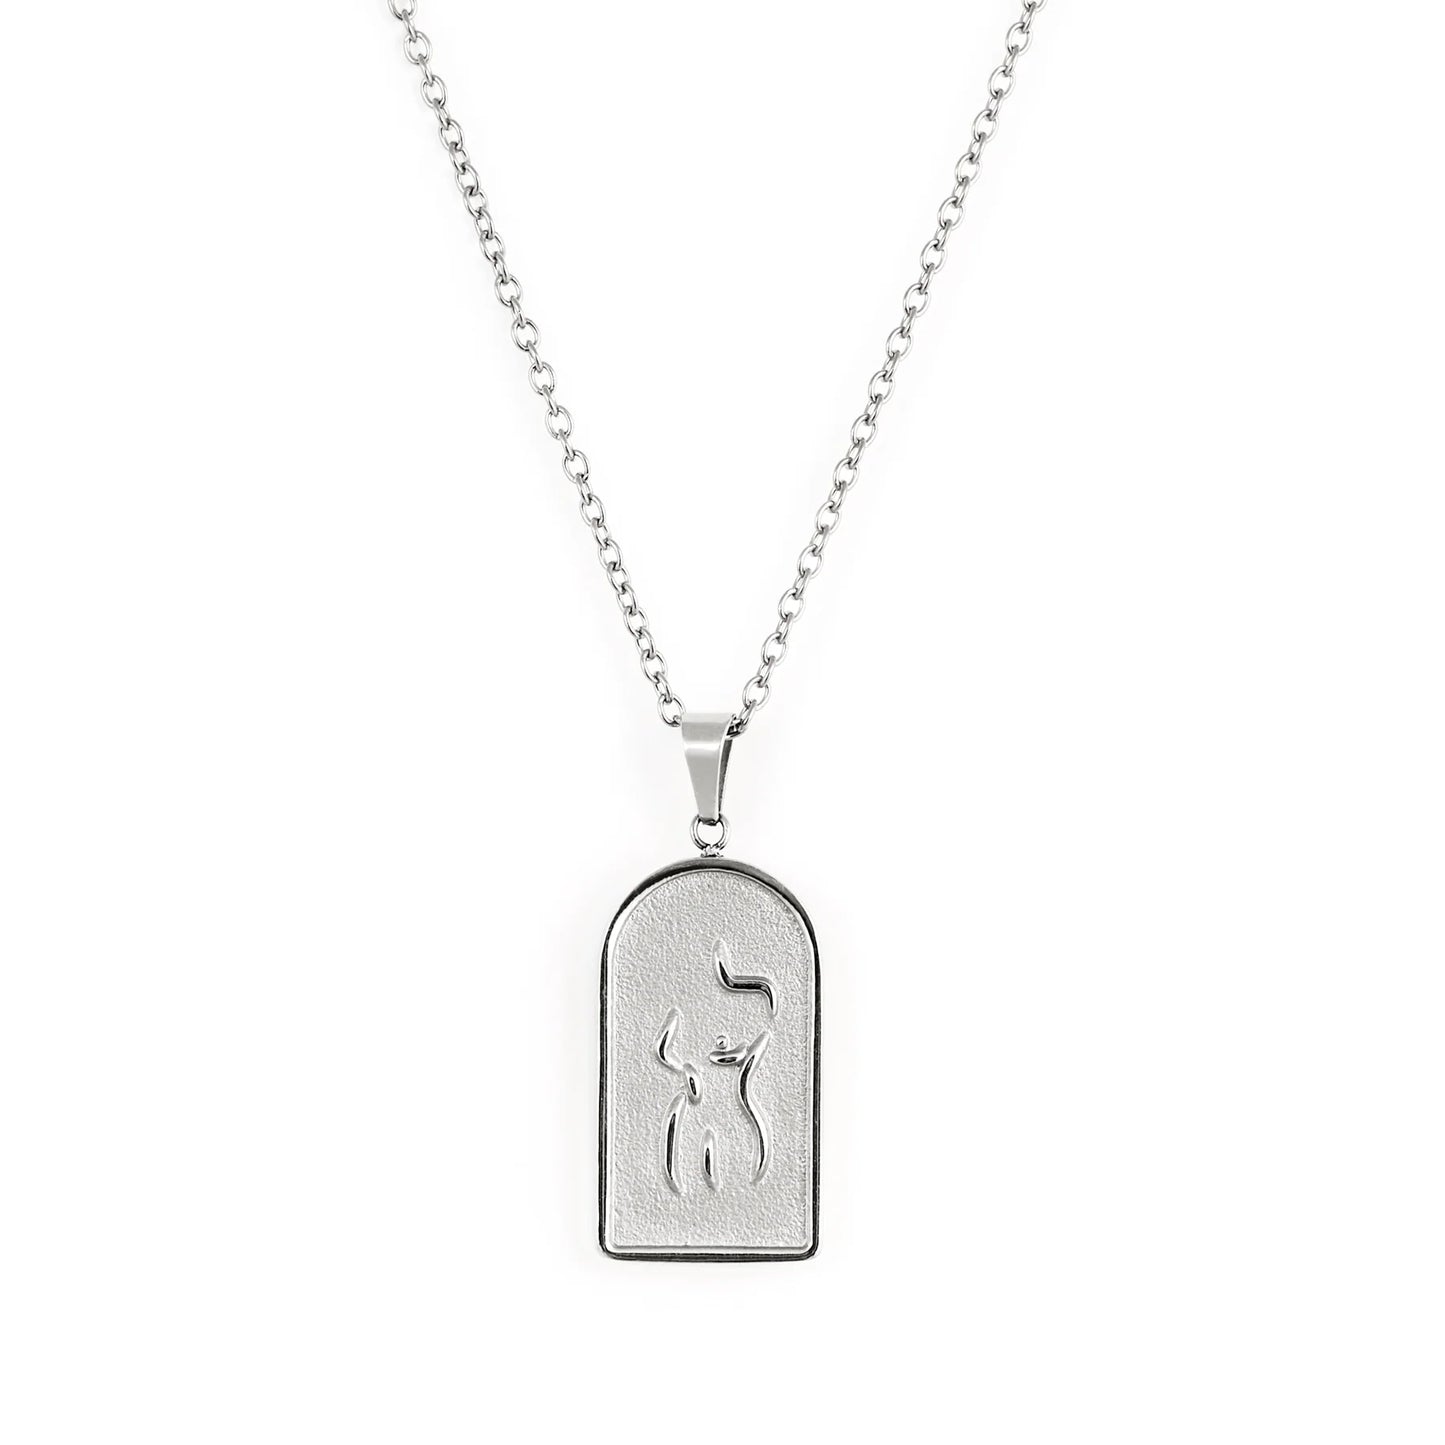 WOMAN necklace - stainless steel